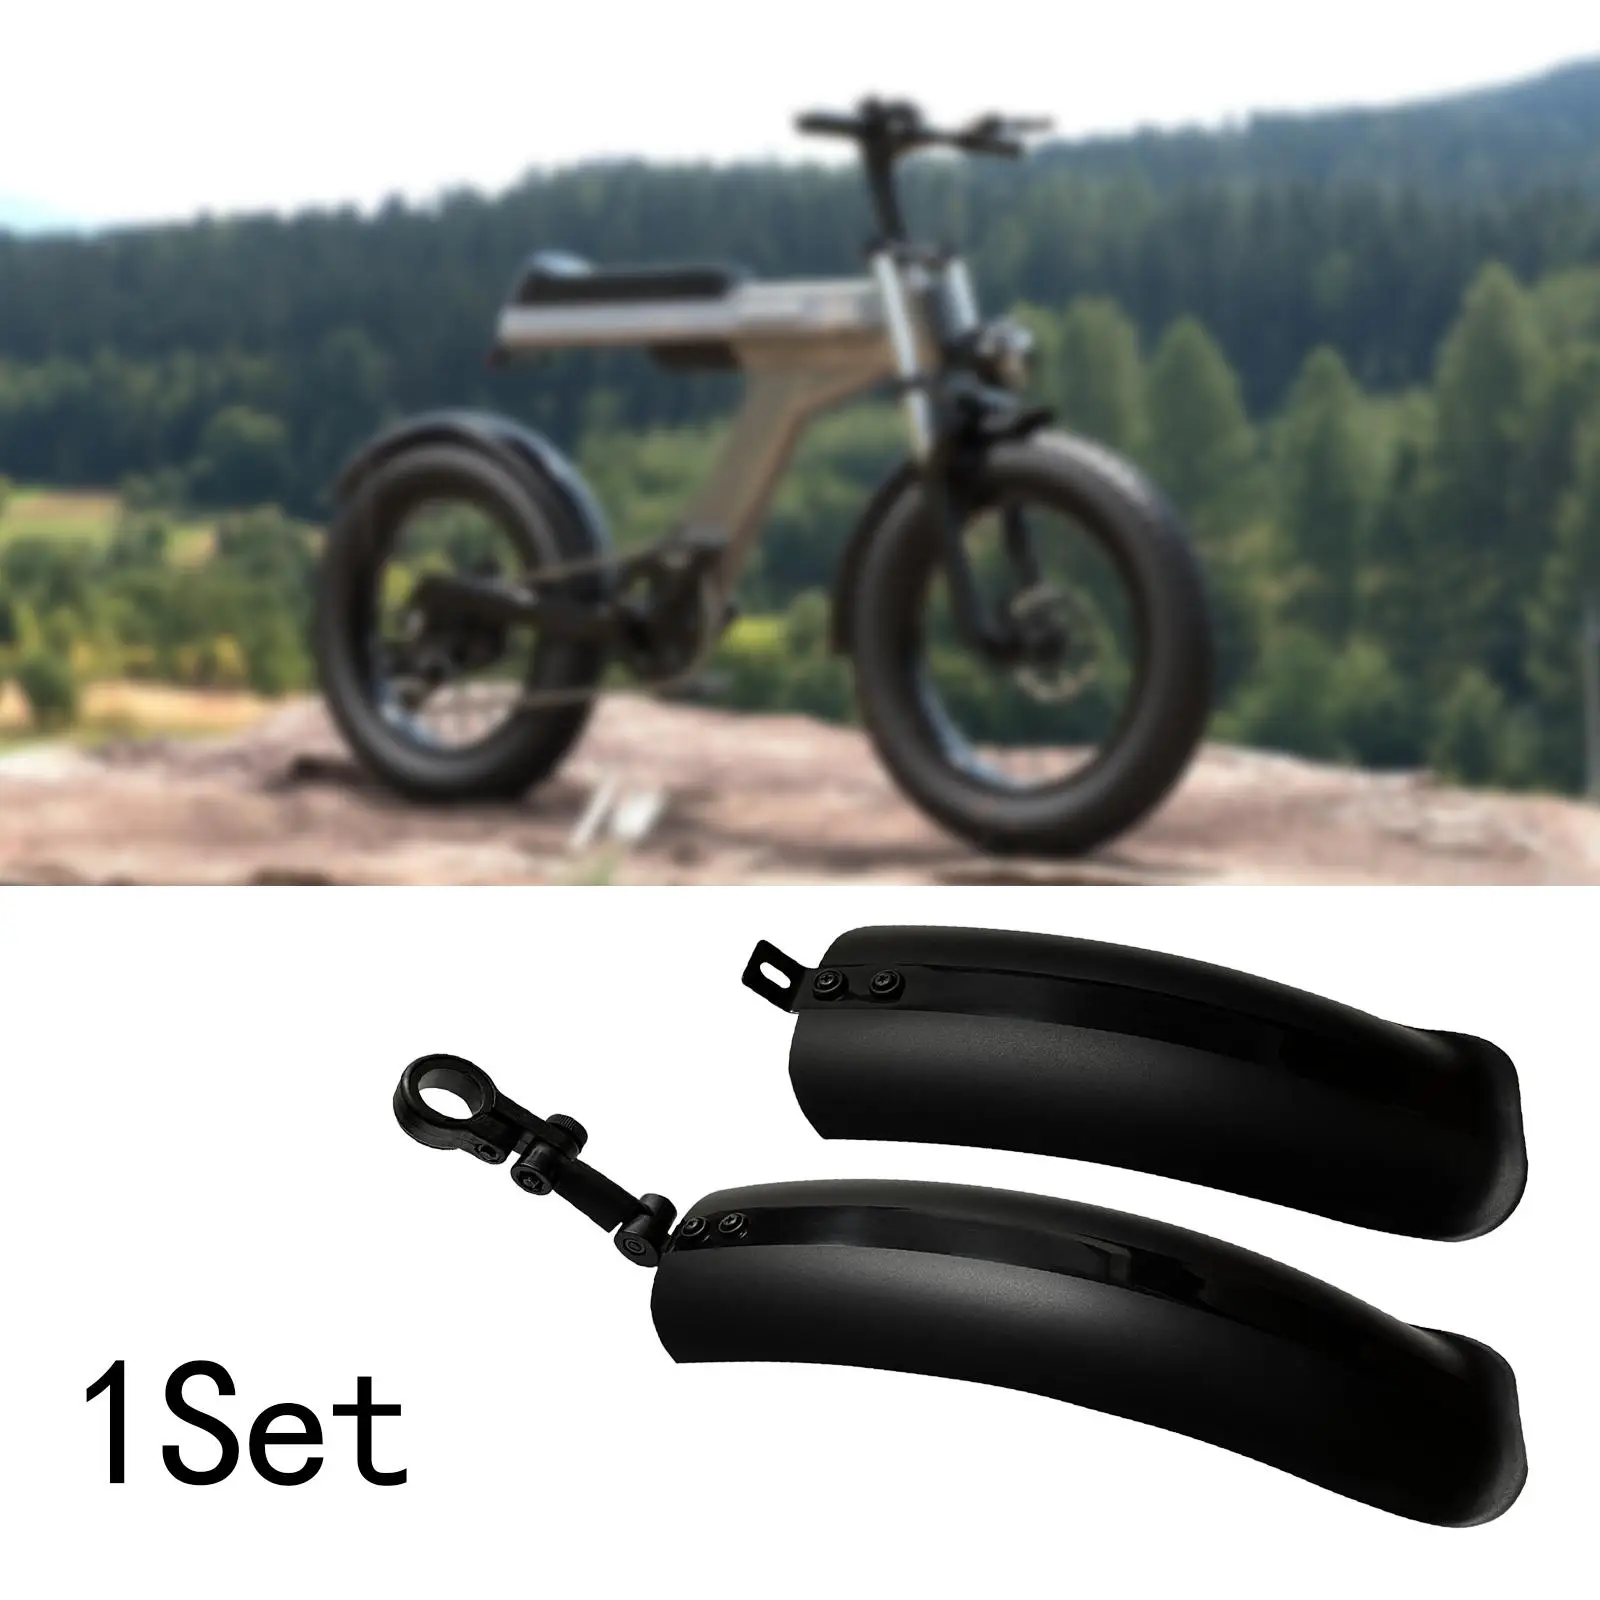 Snow Bikes Mudguard Set Portable Equipment Fittings Front & Rear Fenders for Outdoor Traveling Beach Bikes Riding Mountain Bike